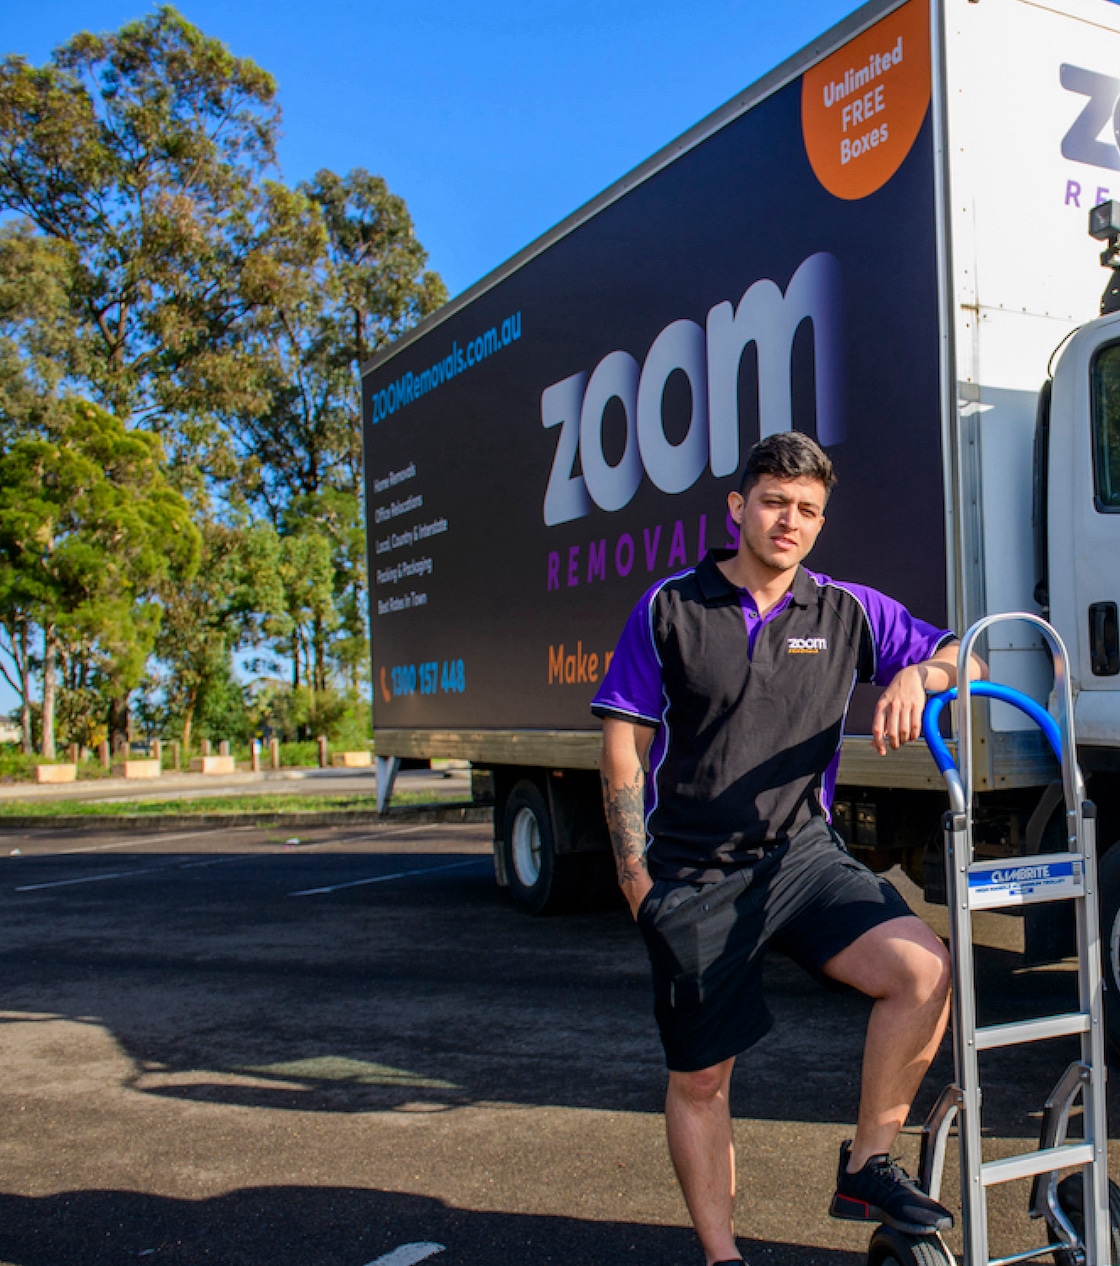 Zoom Removals Team Member and Moving Truck